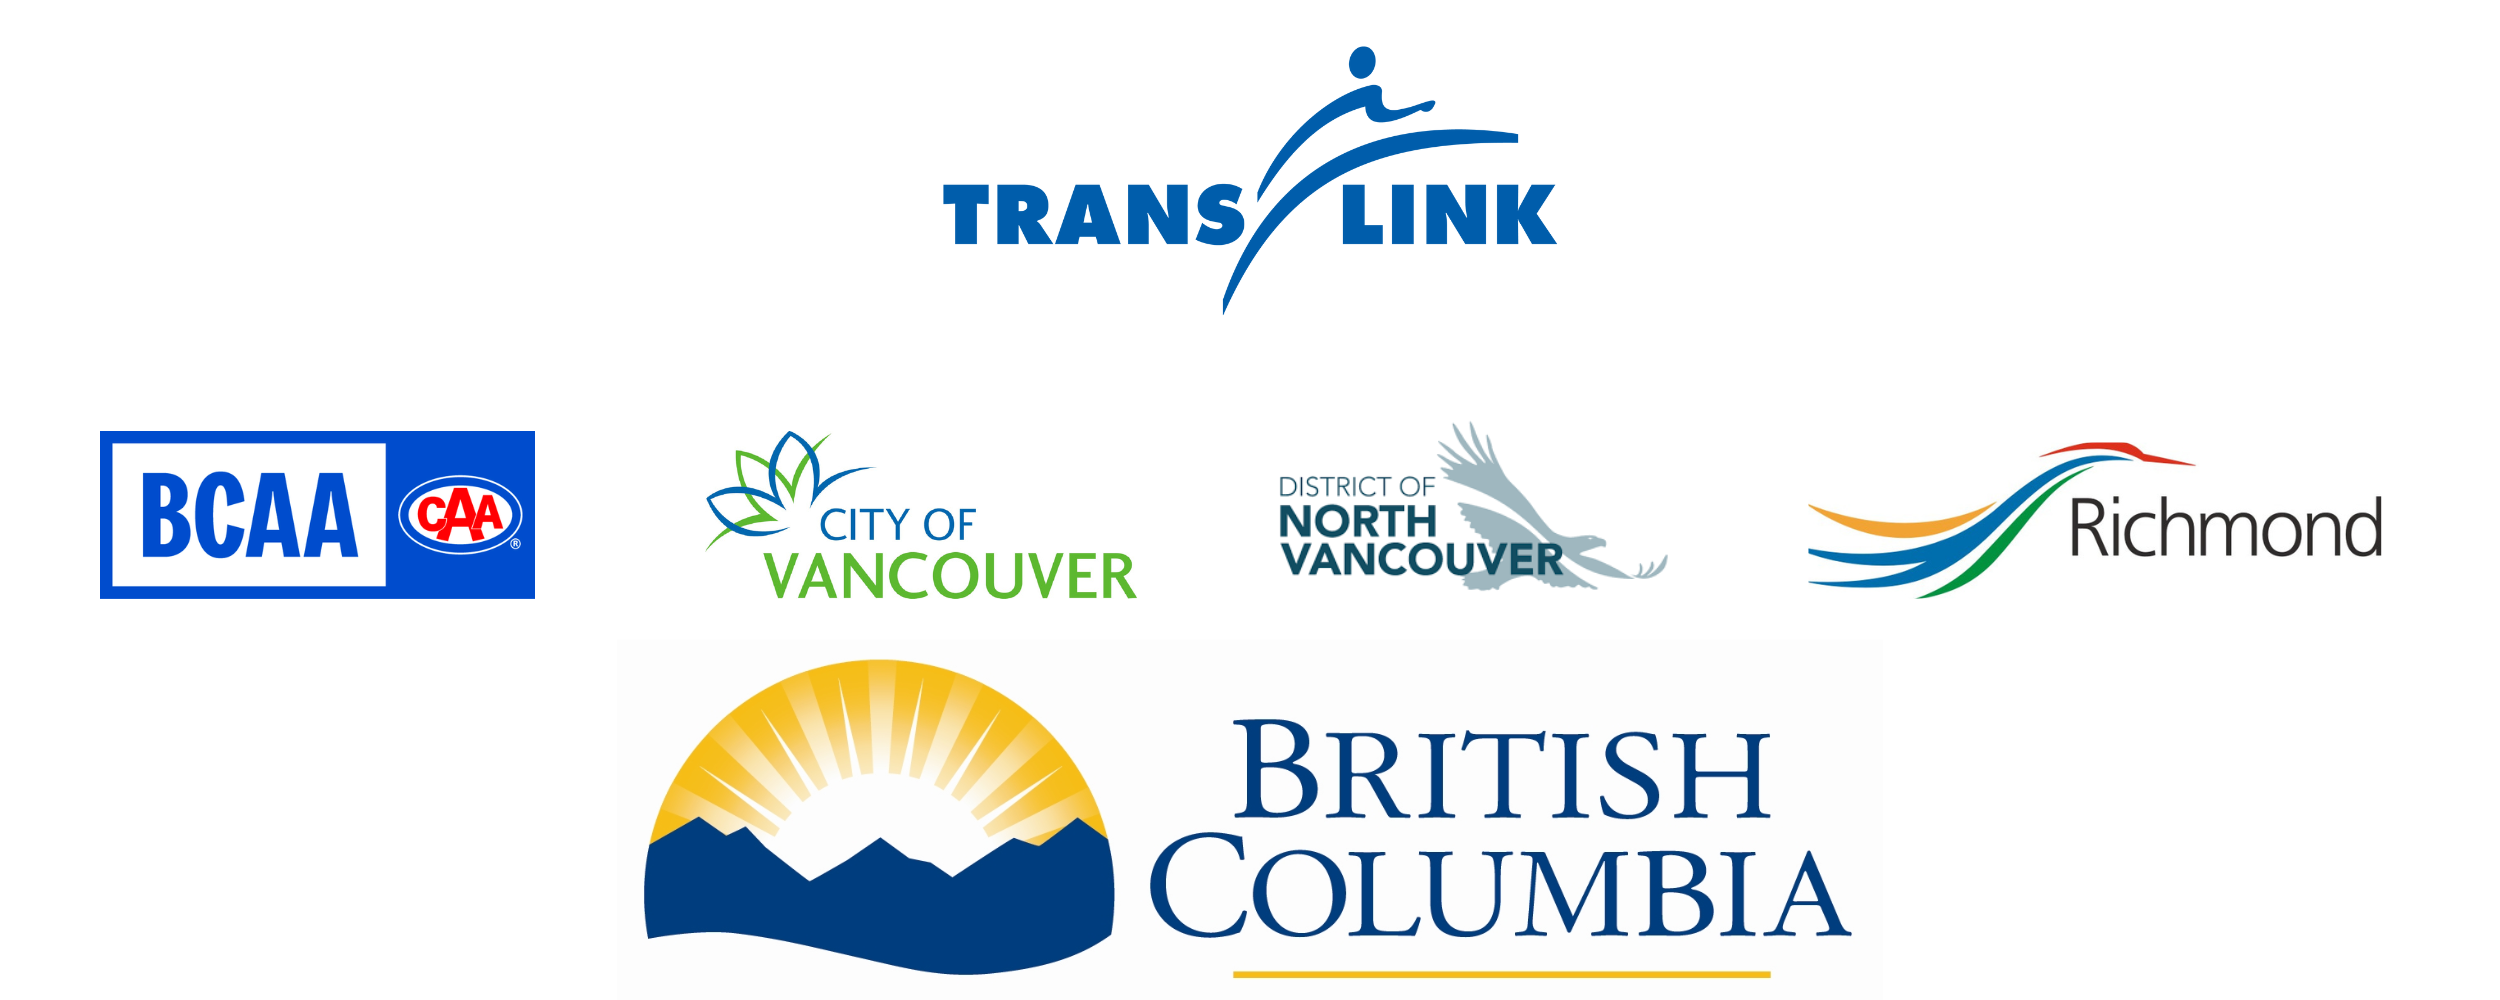 A logo slurry of the program funders. The logos include TransLink, BCAA, City of Vancouver, District of North Vancouver and the City of Richmond.